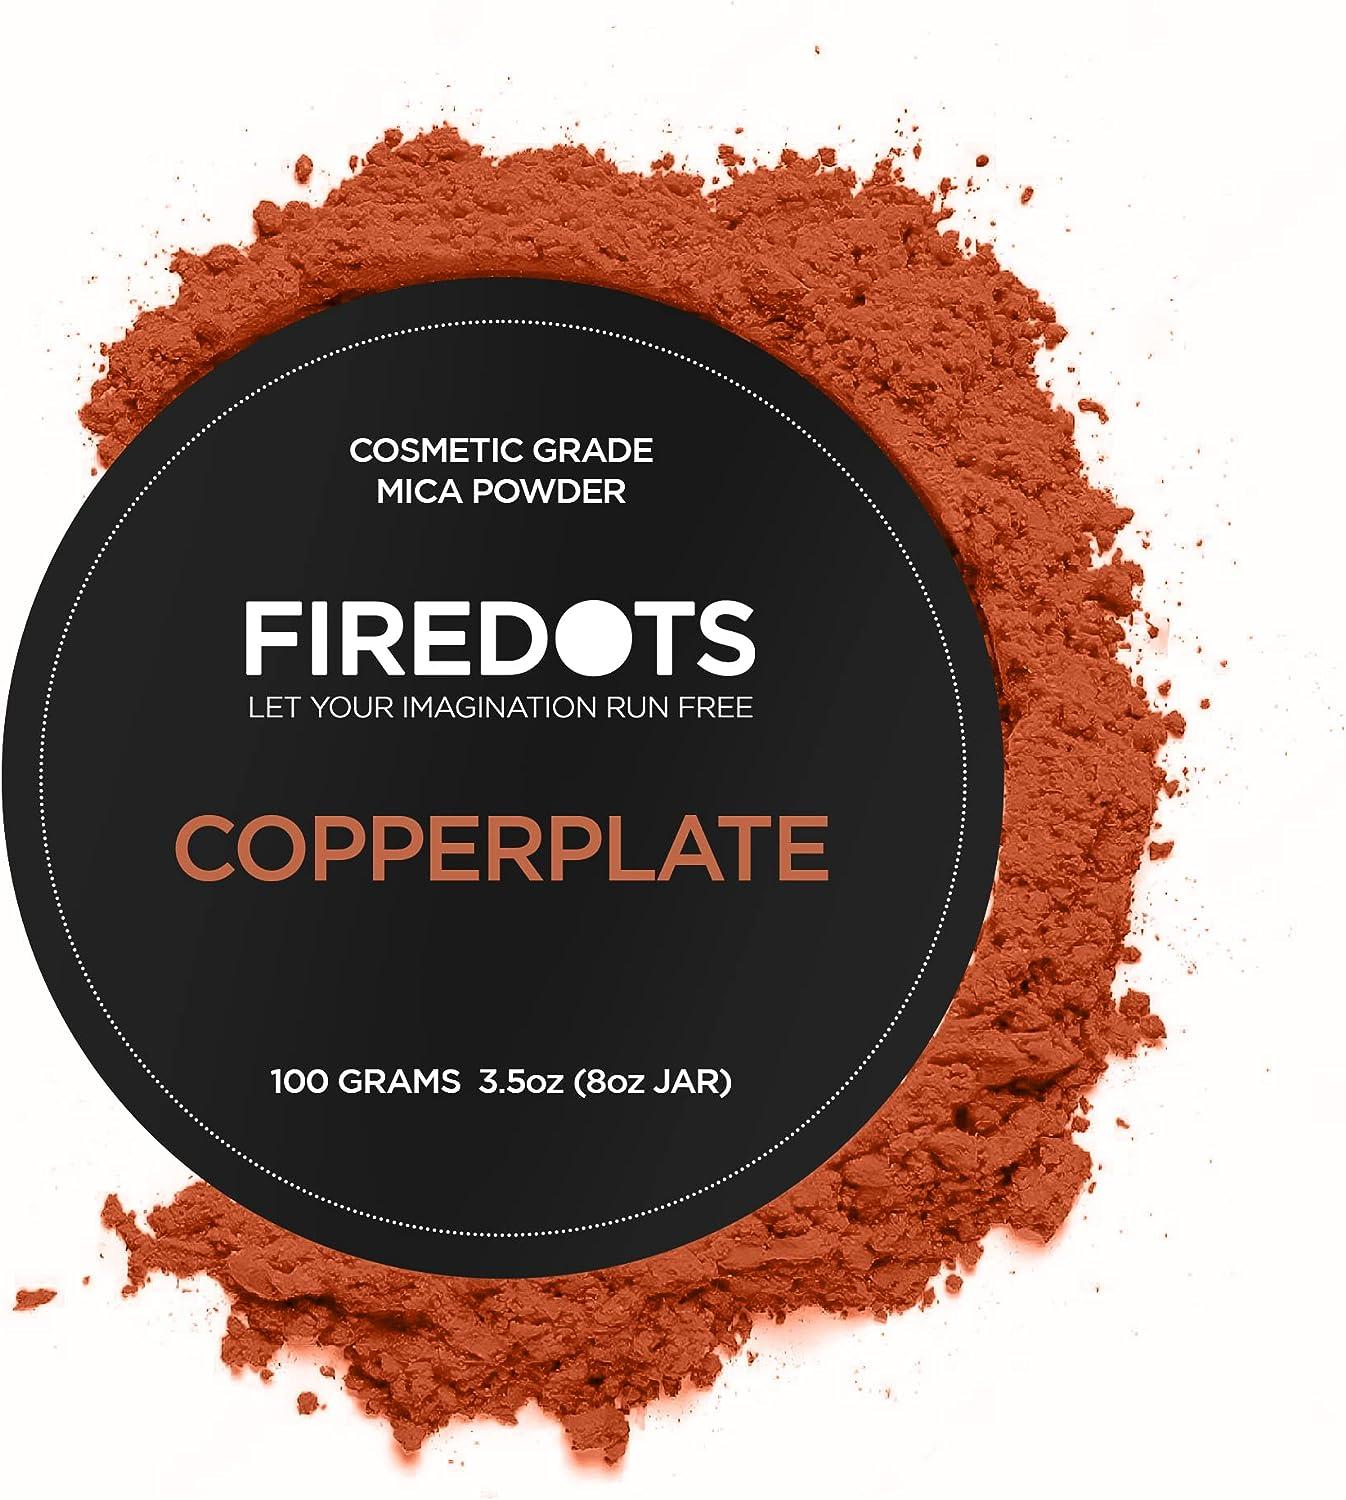 FIREDOTS Copper Mica Powder for Epoxy Resin Art, Massive 100g Jar, Easy to  Mix Epoxy Resin Pigment Powder for Soap Making, Candle Making, Body Butter  and Lip Gloss, Copper Pigment Powder Copperplate